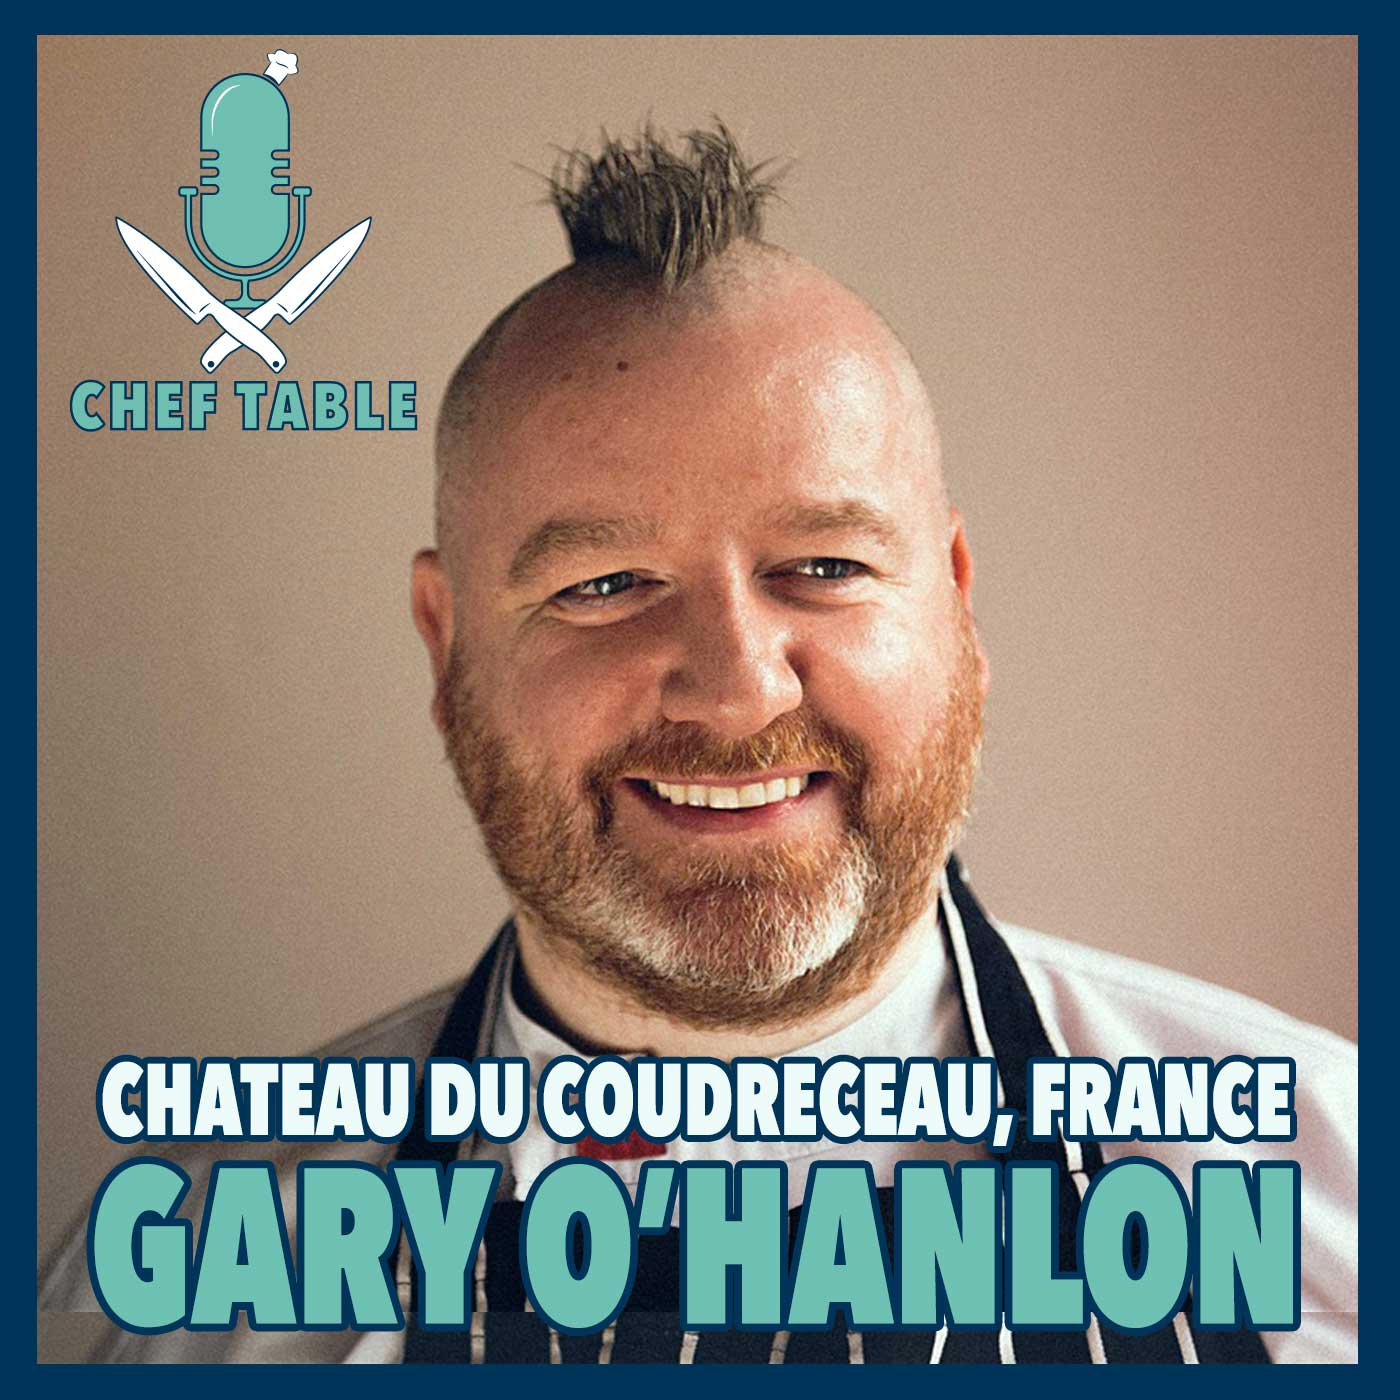 Join us in episode 5 with Gary O’Hanlon, award-winning Chef, Radio-TV Broadcaster, Columnist and currently the Executive Chef at the Chateau du Coudreceau in France.